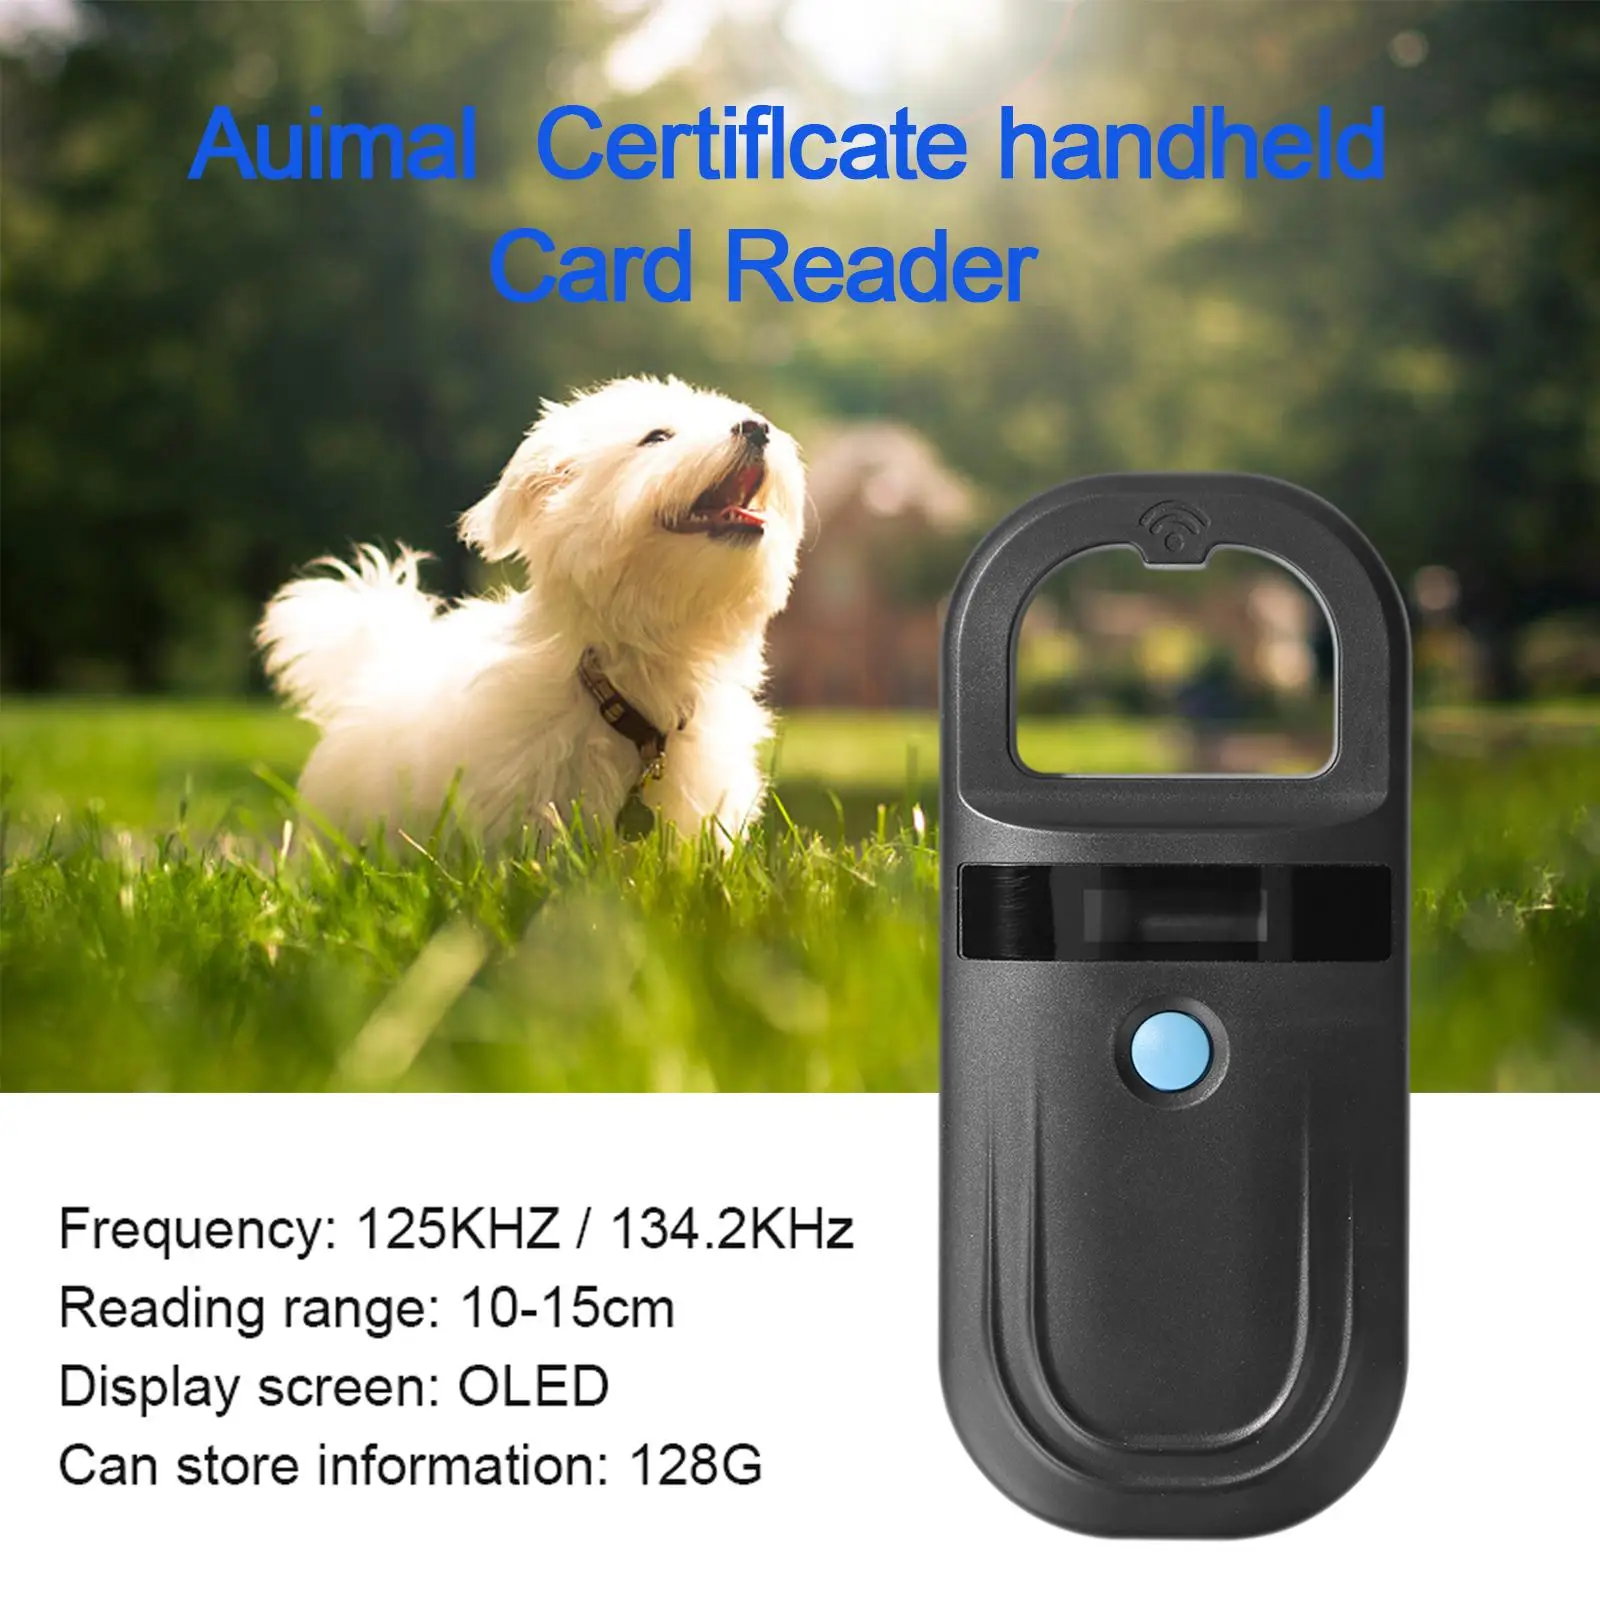 Portable Pet Scanner `` OLED Display for Cats  Identification